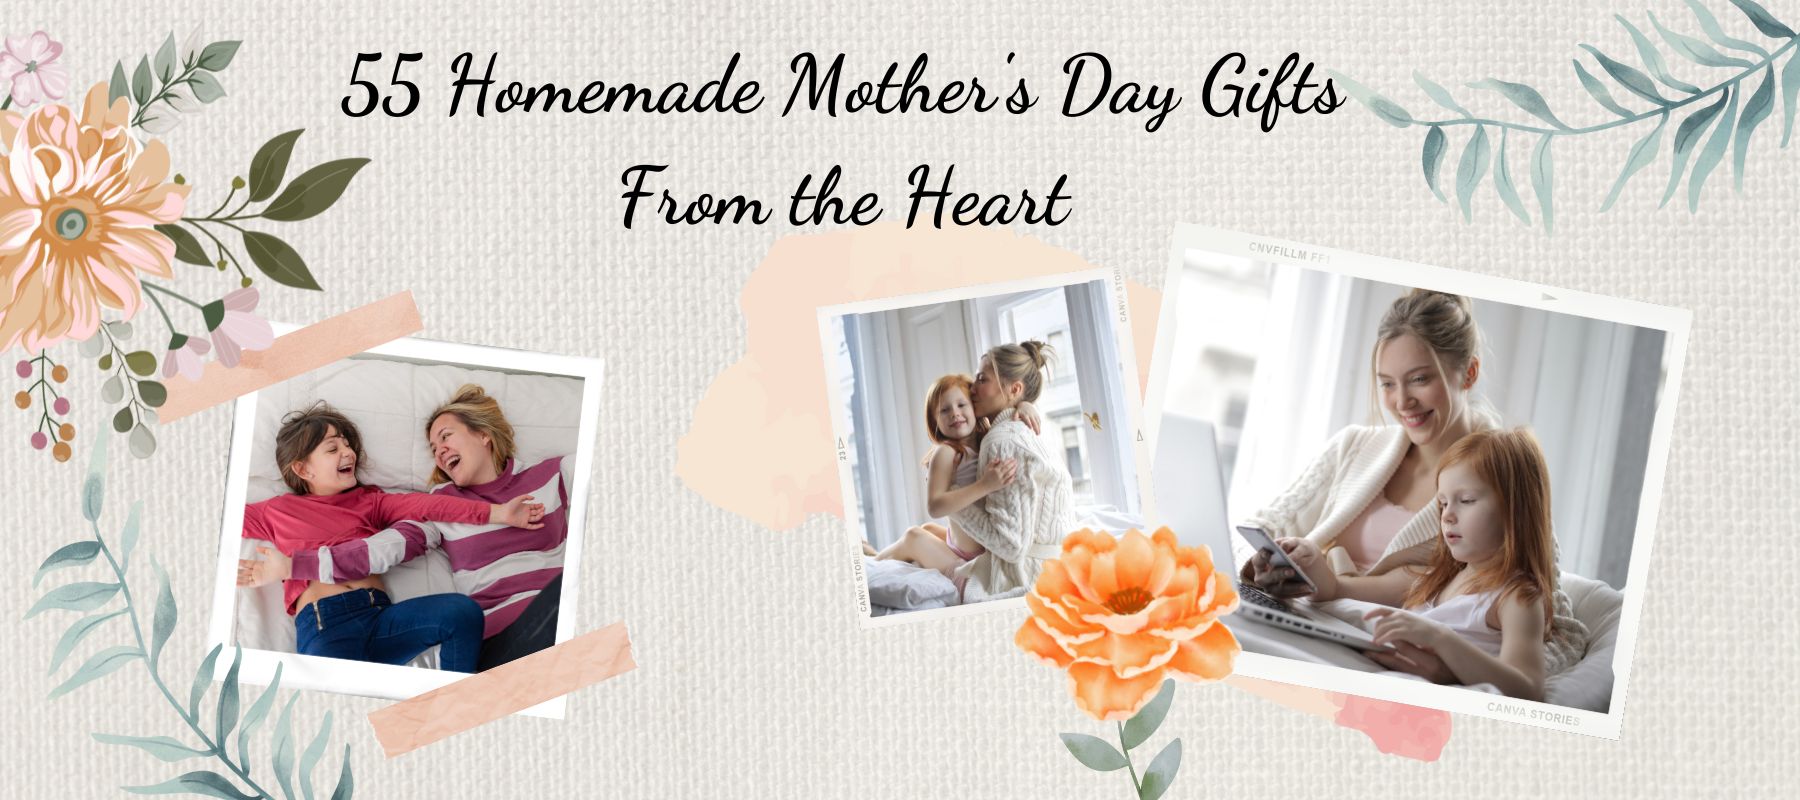 55 Homemade Mother's Day Gifts From the Heart